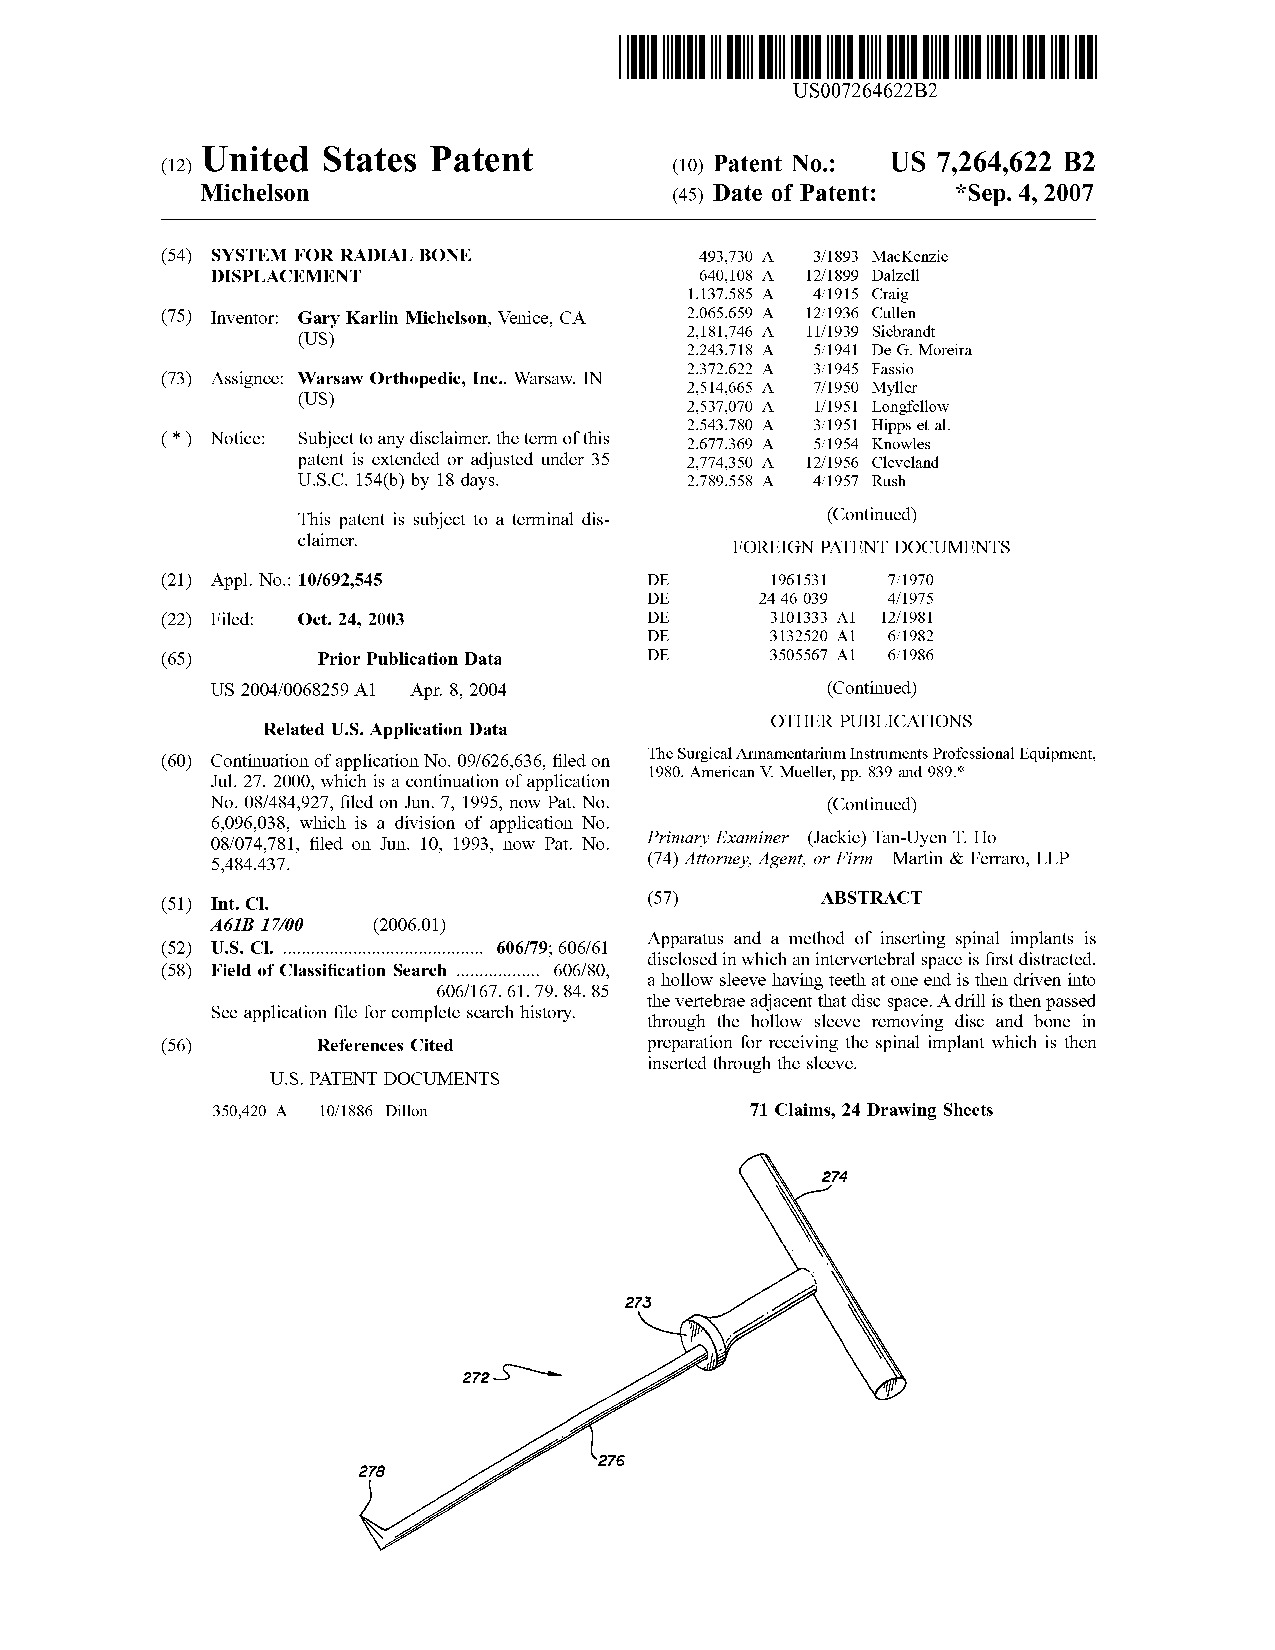 System for radial bone displacement - Patent 7,264,622